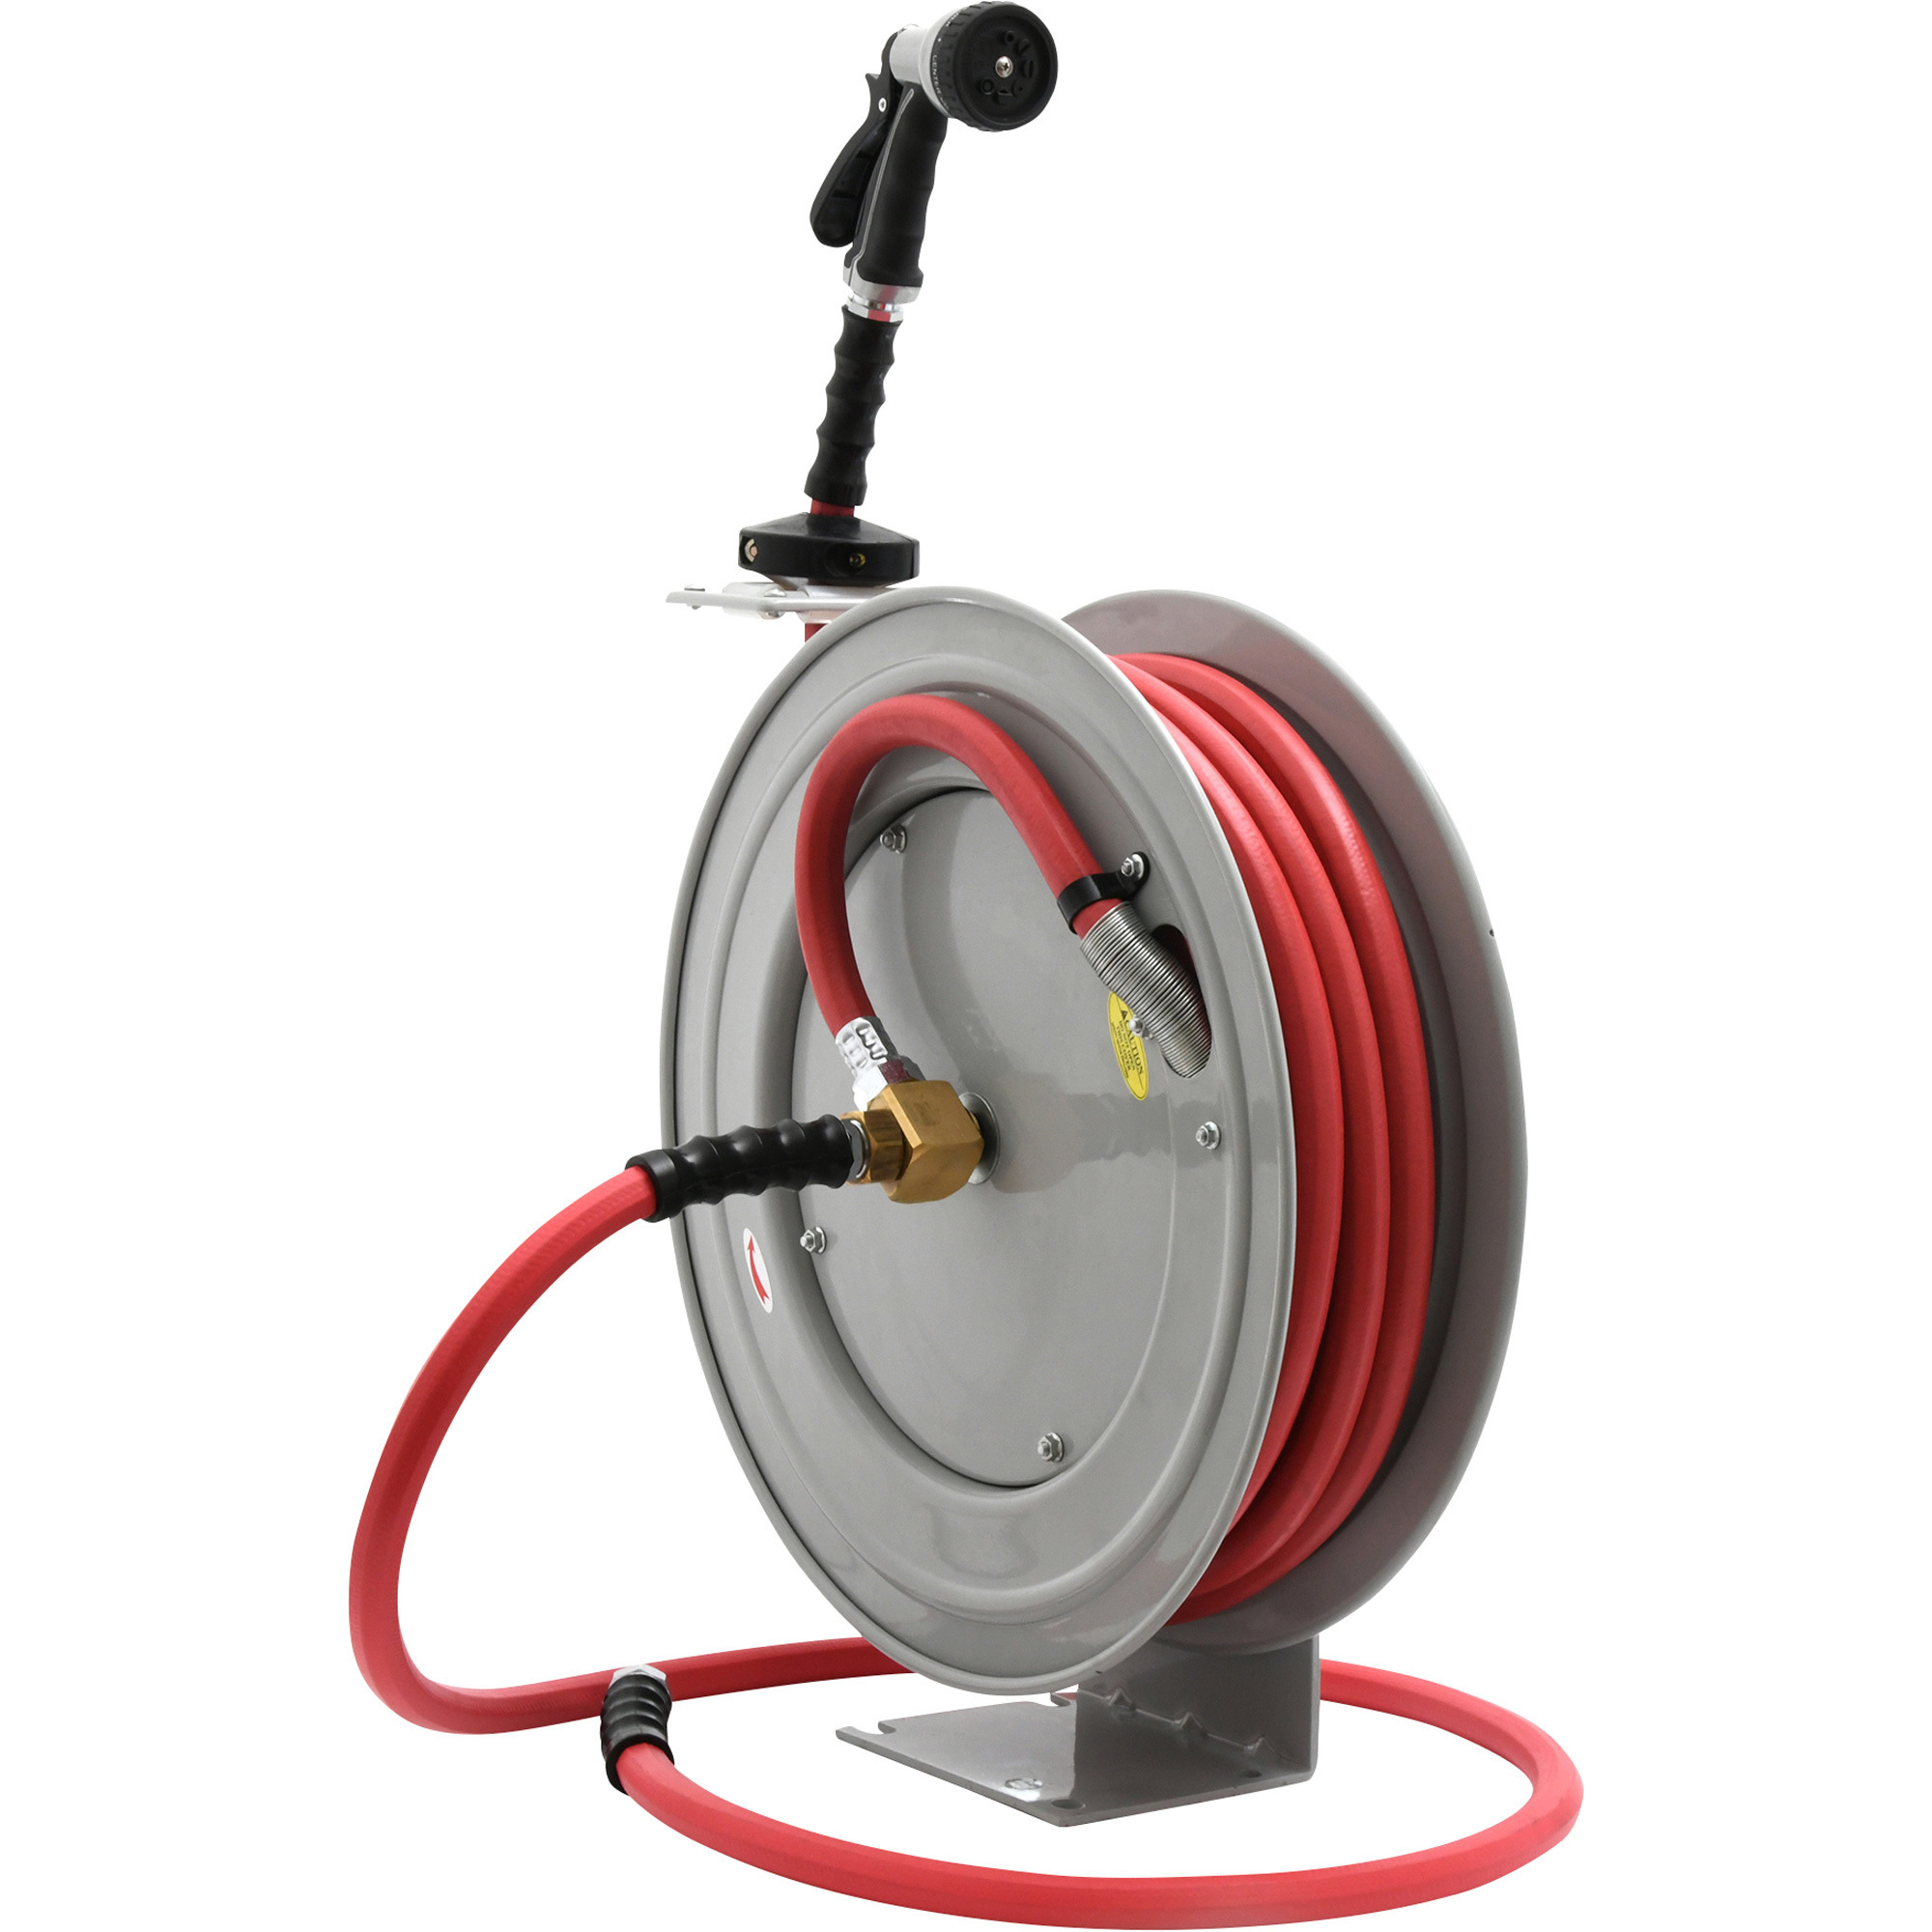 Avagard Retractable Hose Reel, Includes 5/8in. x 50ft. Hot/Cold Water Hose,  Model# AVGWR5850-2